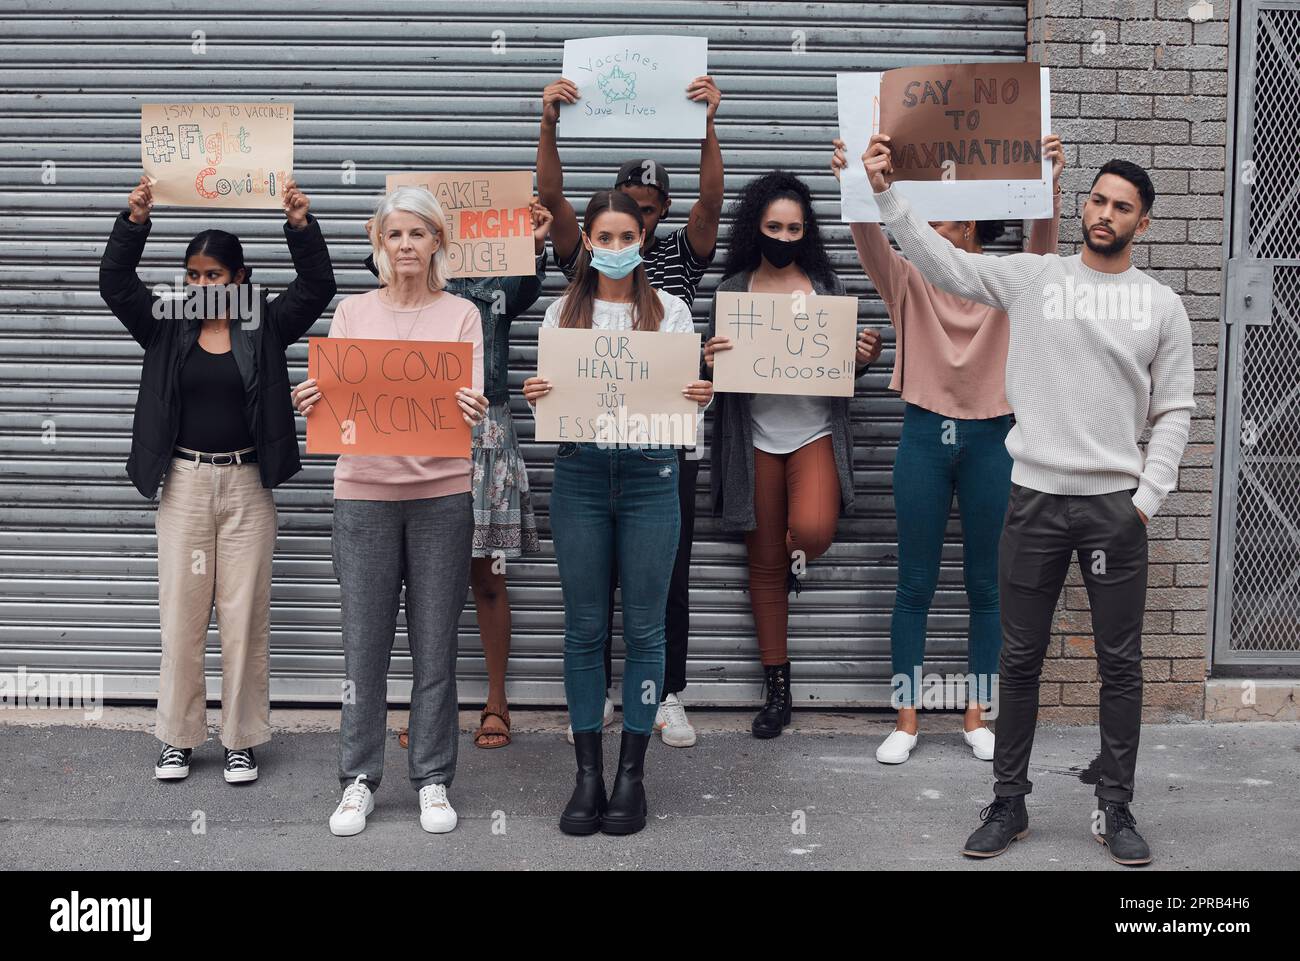 Say no to the vaccine. Full length portrait of a group of demonstrators holding up signs protesting against the covid 19 vaccine. Stock Photo